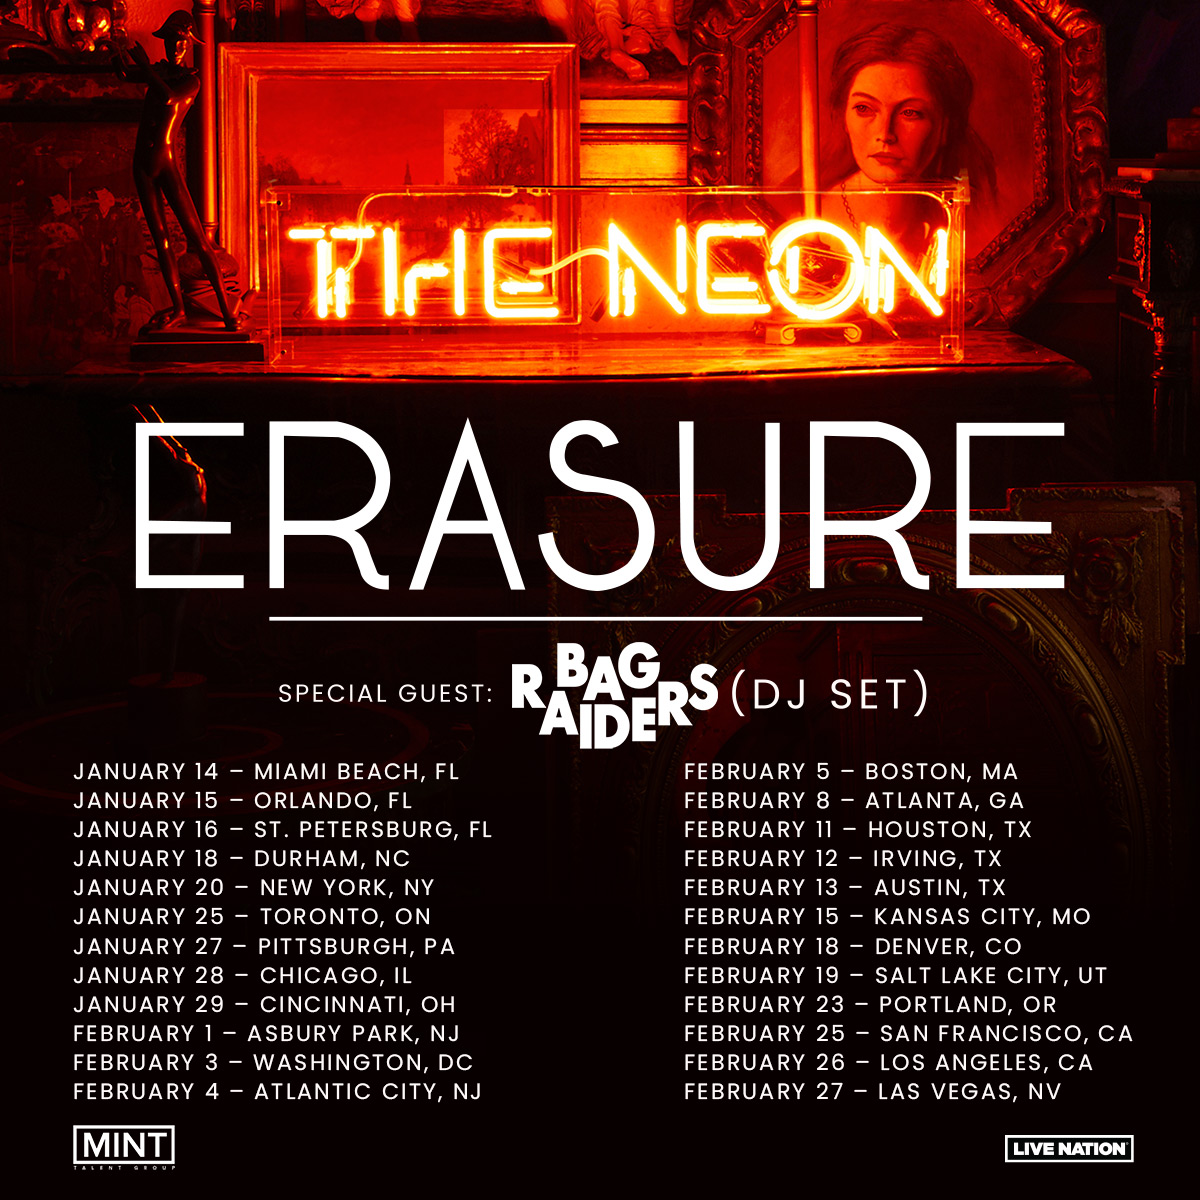 Erasure announce ‘The Neon Tour’ North American shows for 2022 THIS